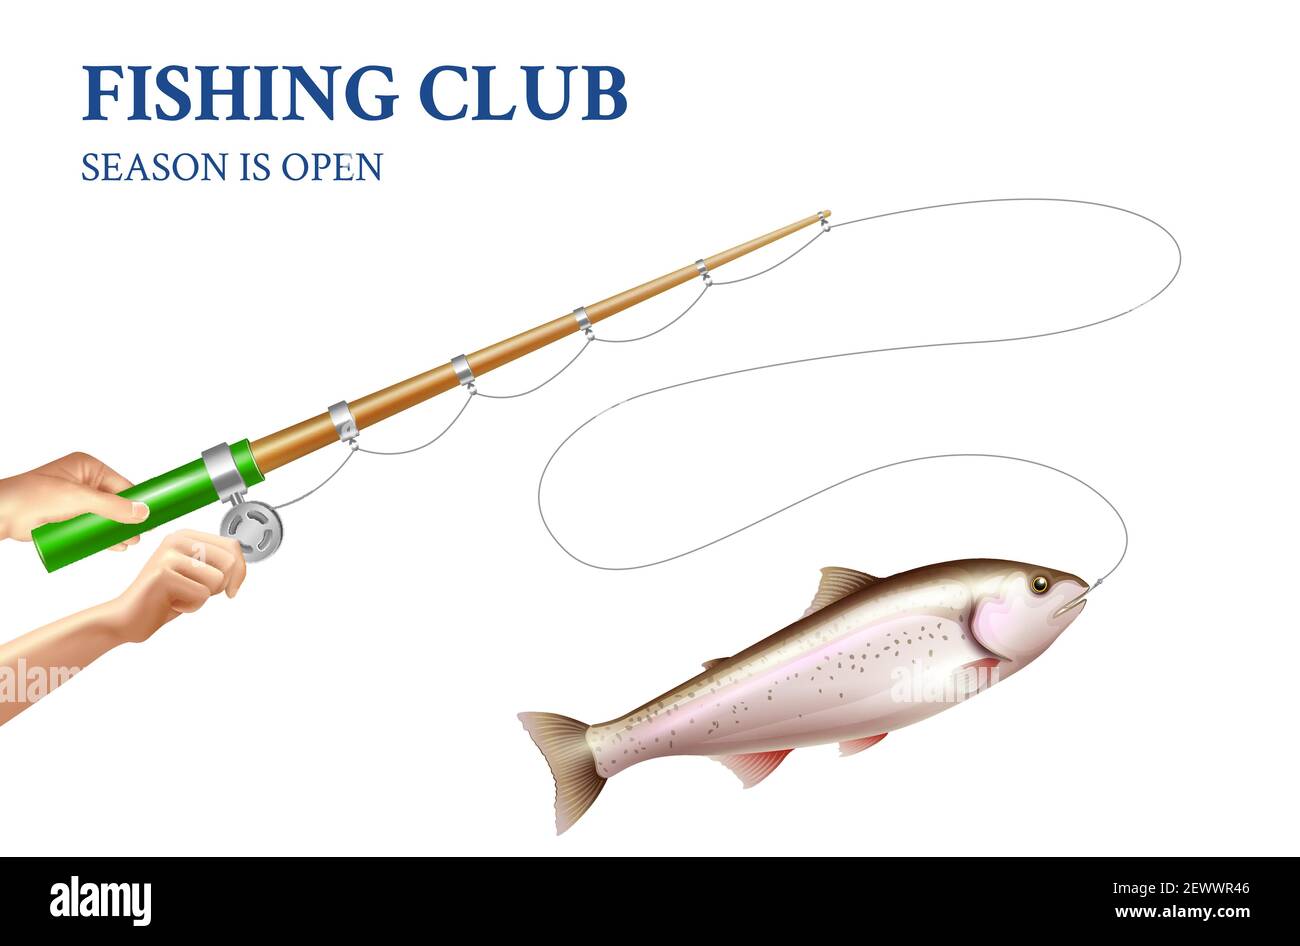 https://c8.alamy.com/comp/2EWWR46/fishing-of-rainbow-trout-on-rod-with-spinning-reel-on-white-background-realistic-vector-illustration-2EWWR46.jpg